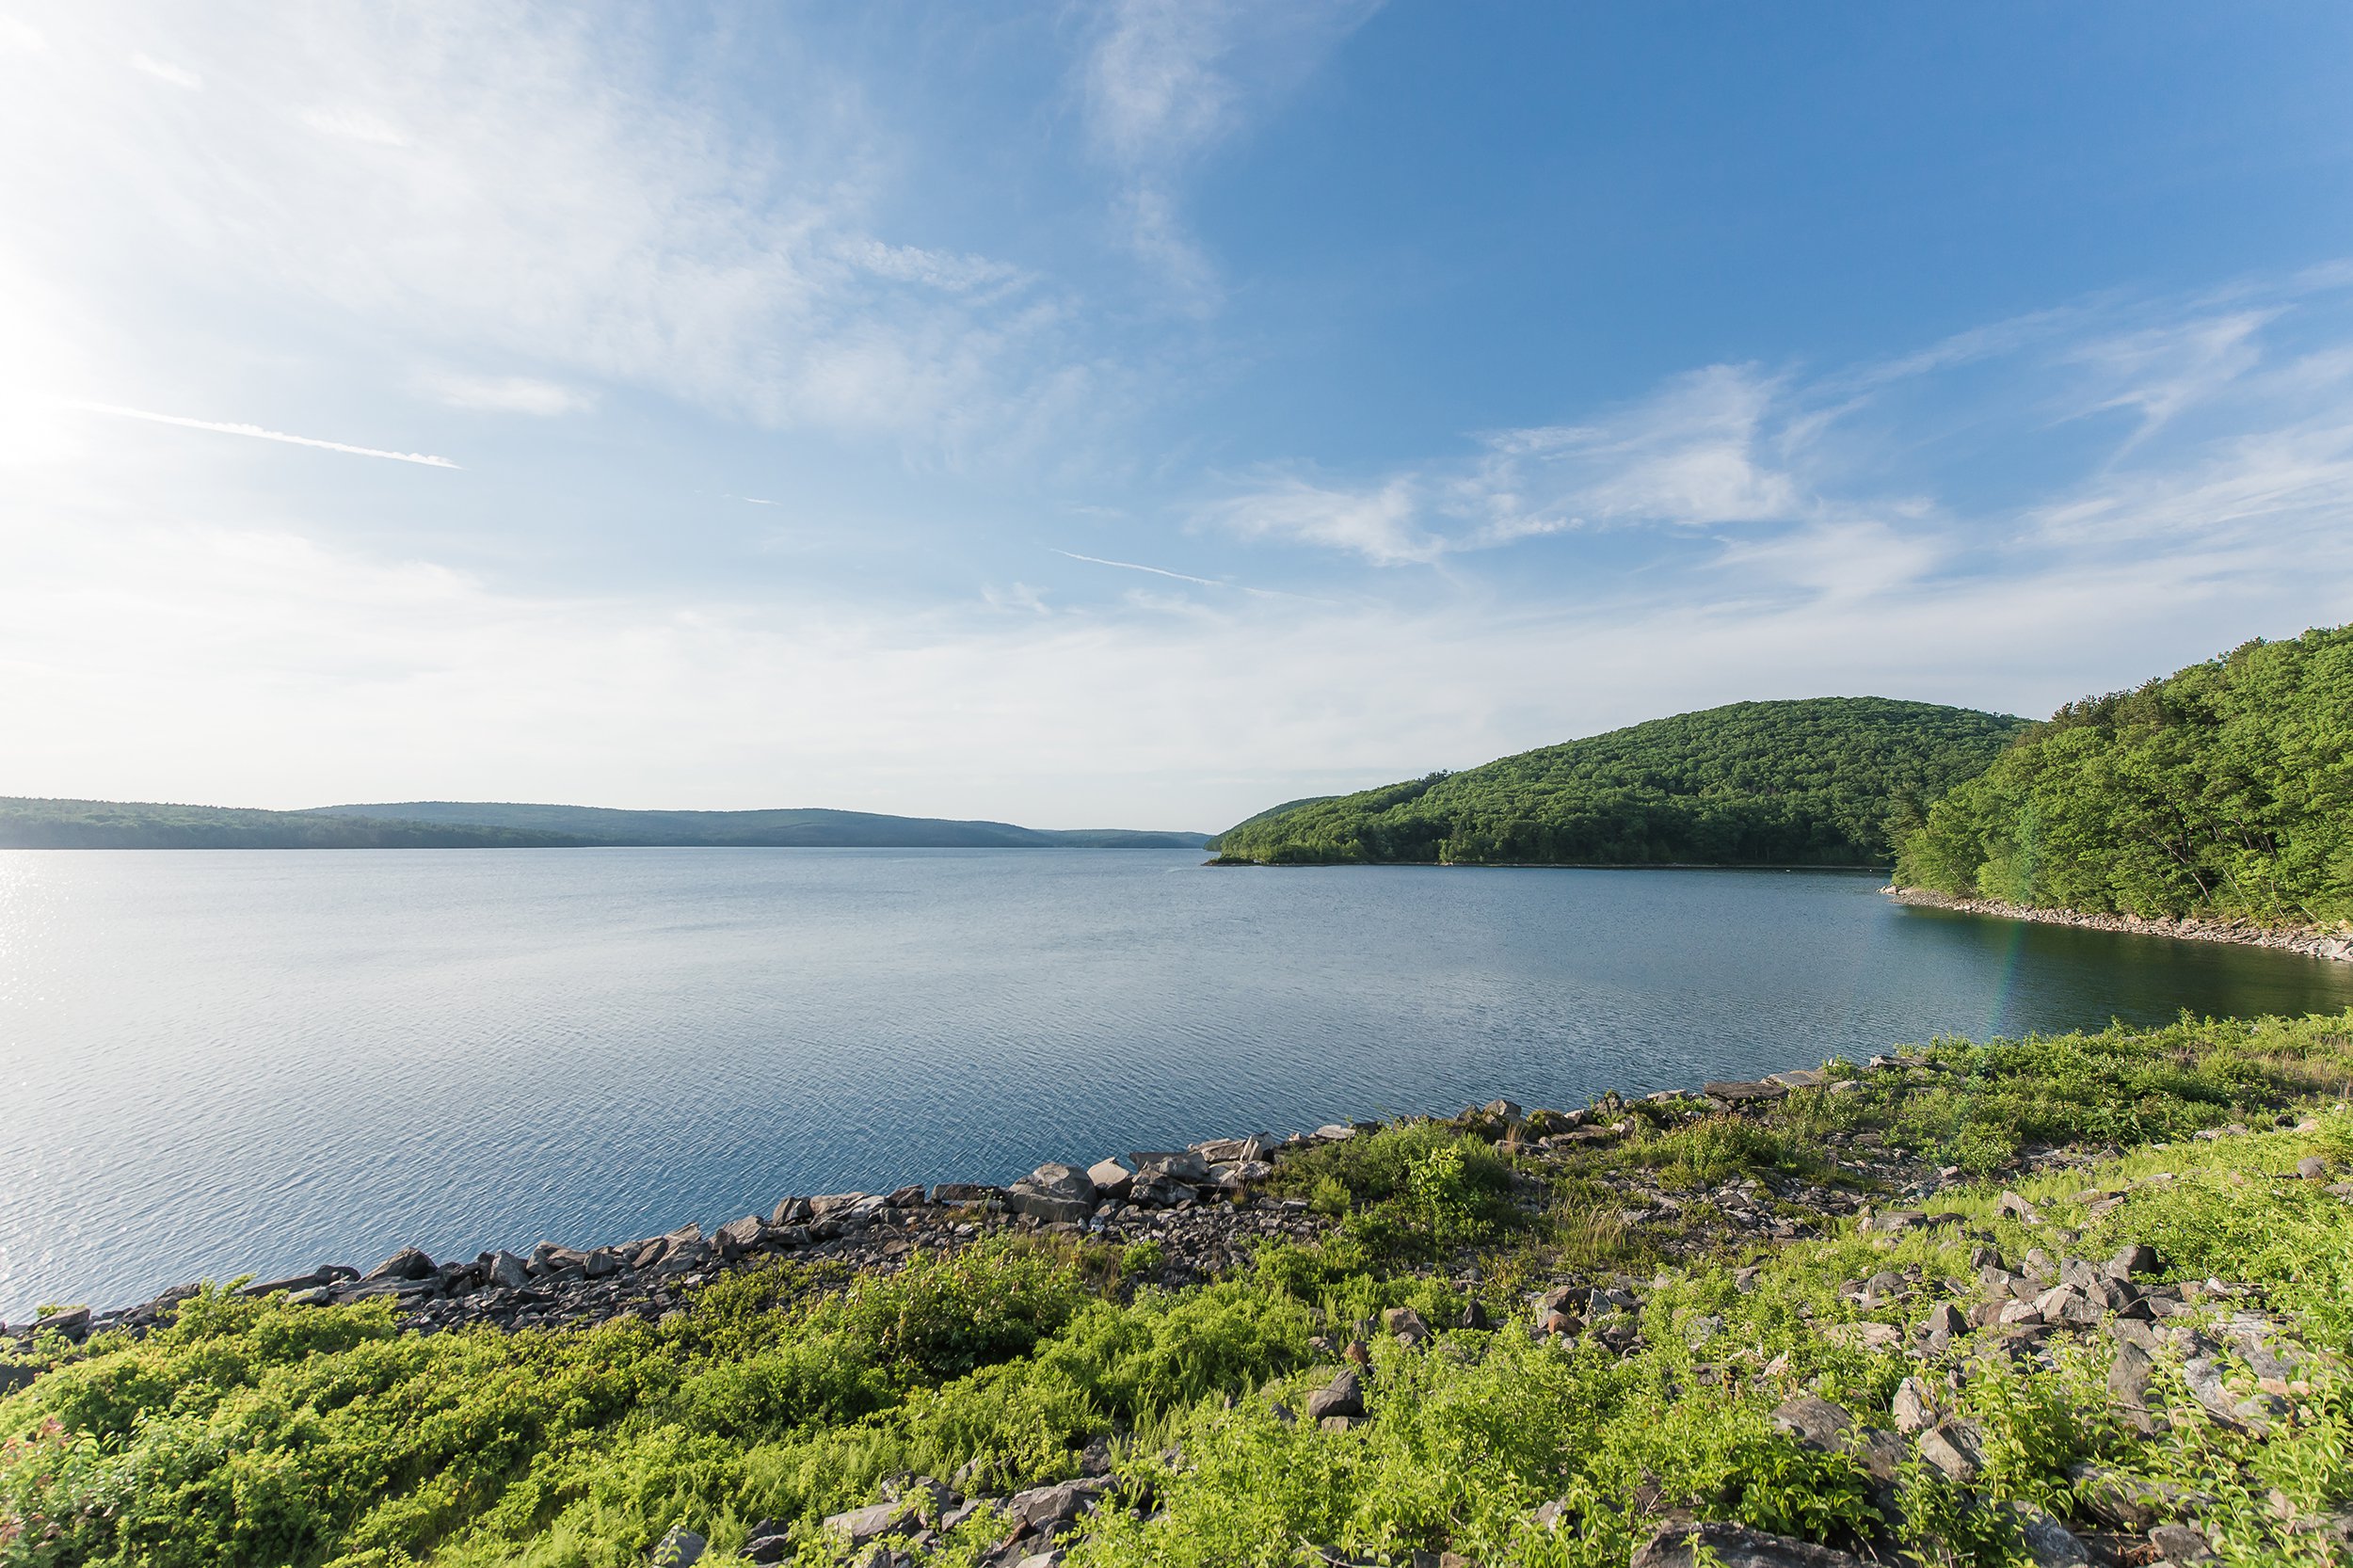 You can fish by boat or from the shore at the <a href="https://www.mass.gov/locations/quabbin-reservoir">Quabbin Reservoir</a>, but no matter which method you prefer, you're likely to go home a winner. The reservoir is one of just two in the entire state of Massachusetts that's home to trophy-sized landlocked Atlantic salmon.